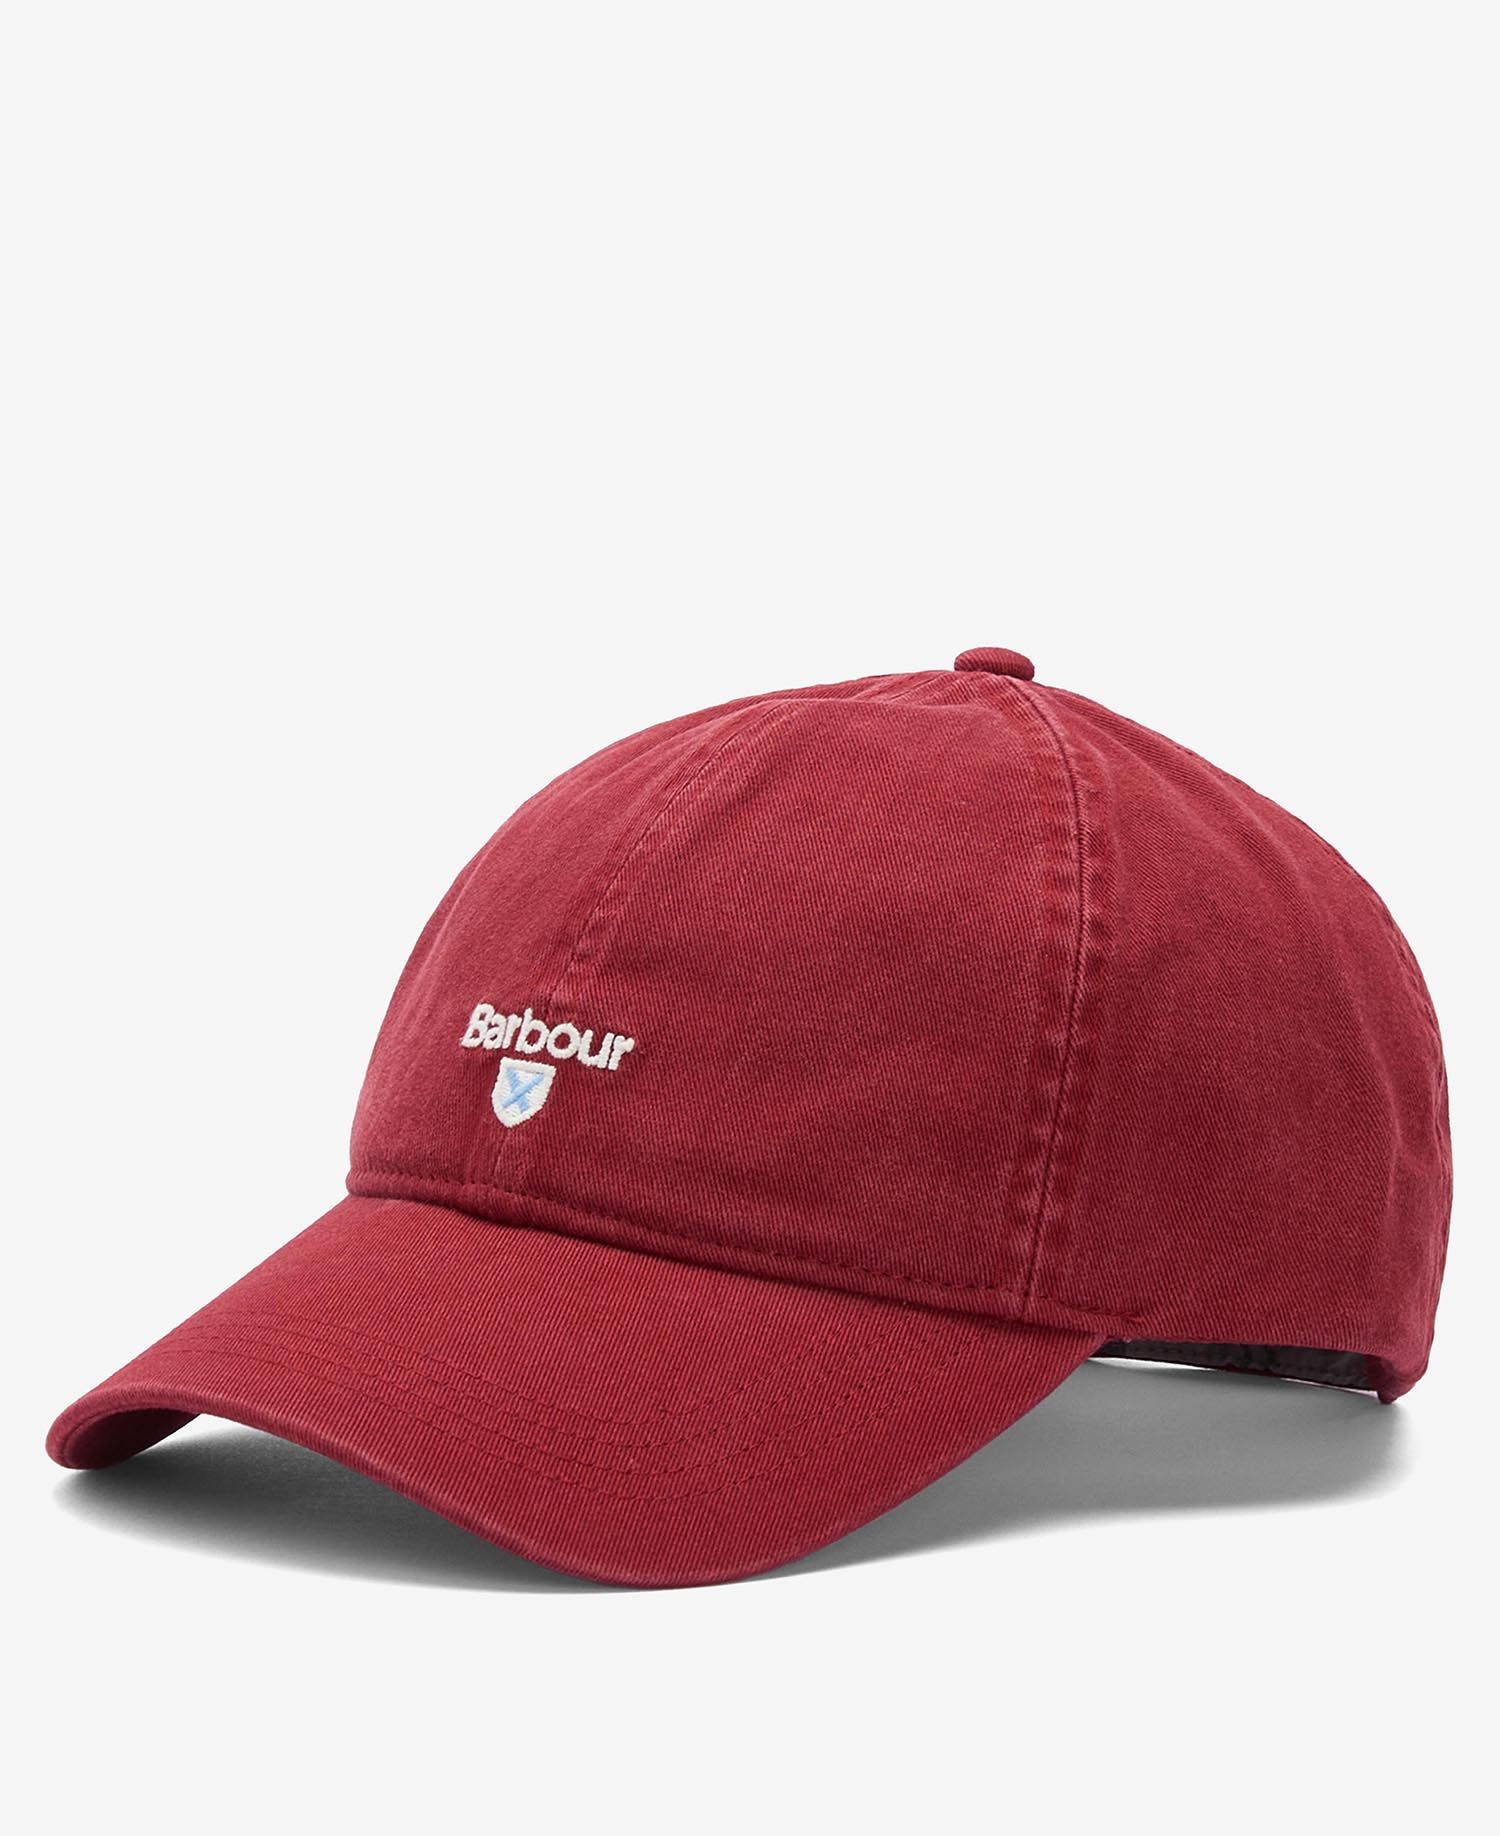 Barbour Cascade Sports Cap in Red | Barbour